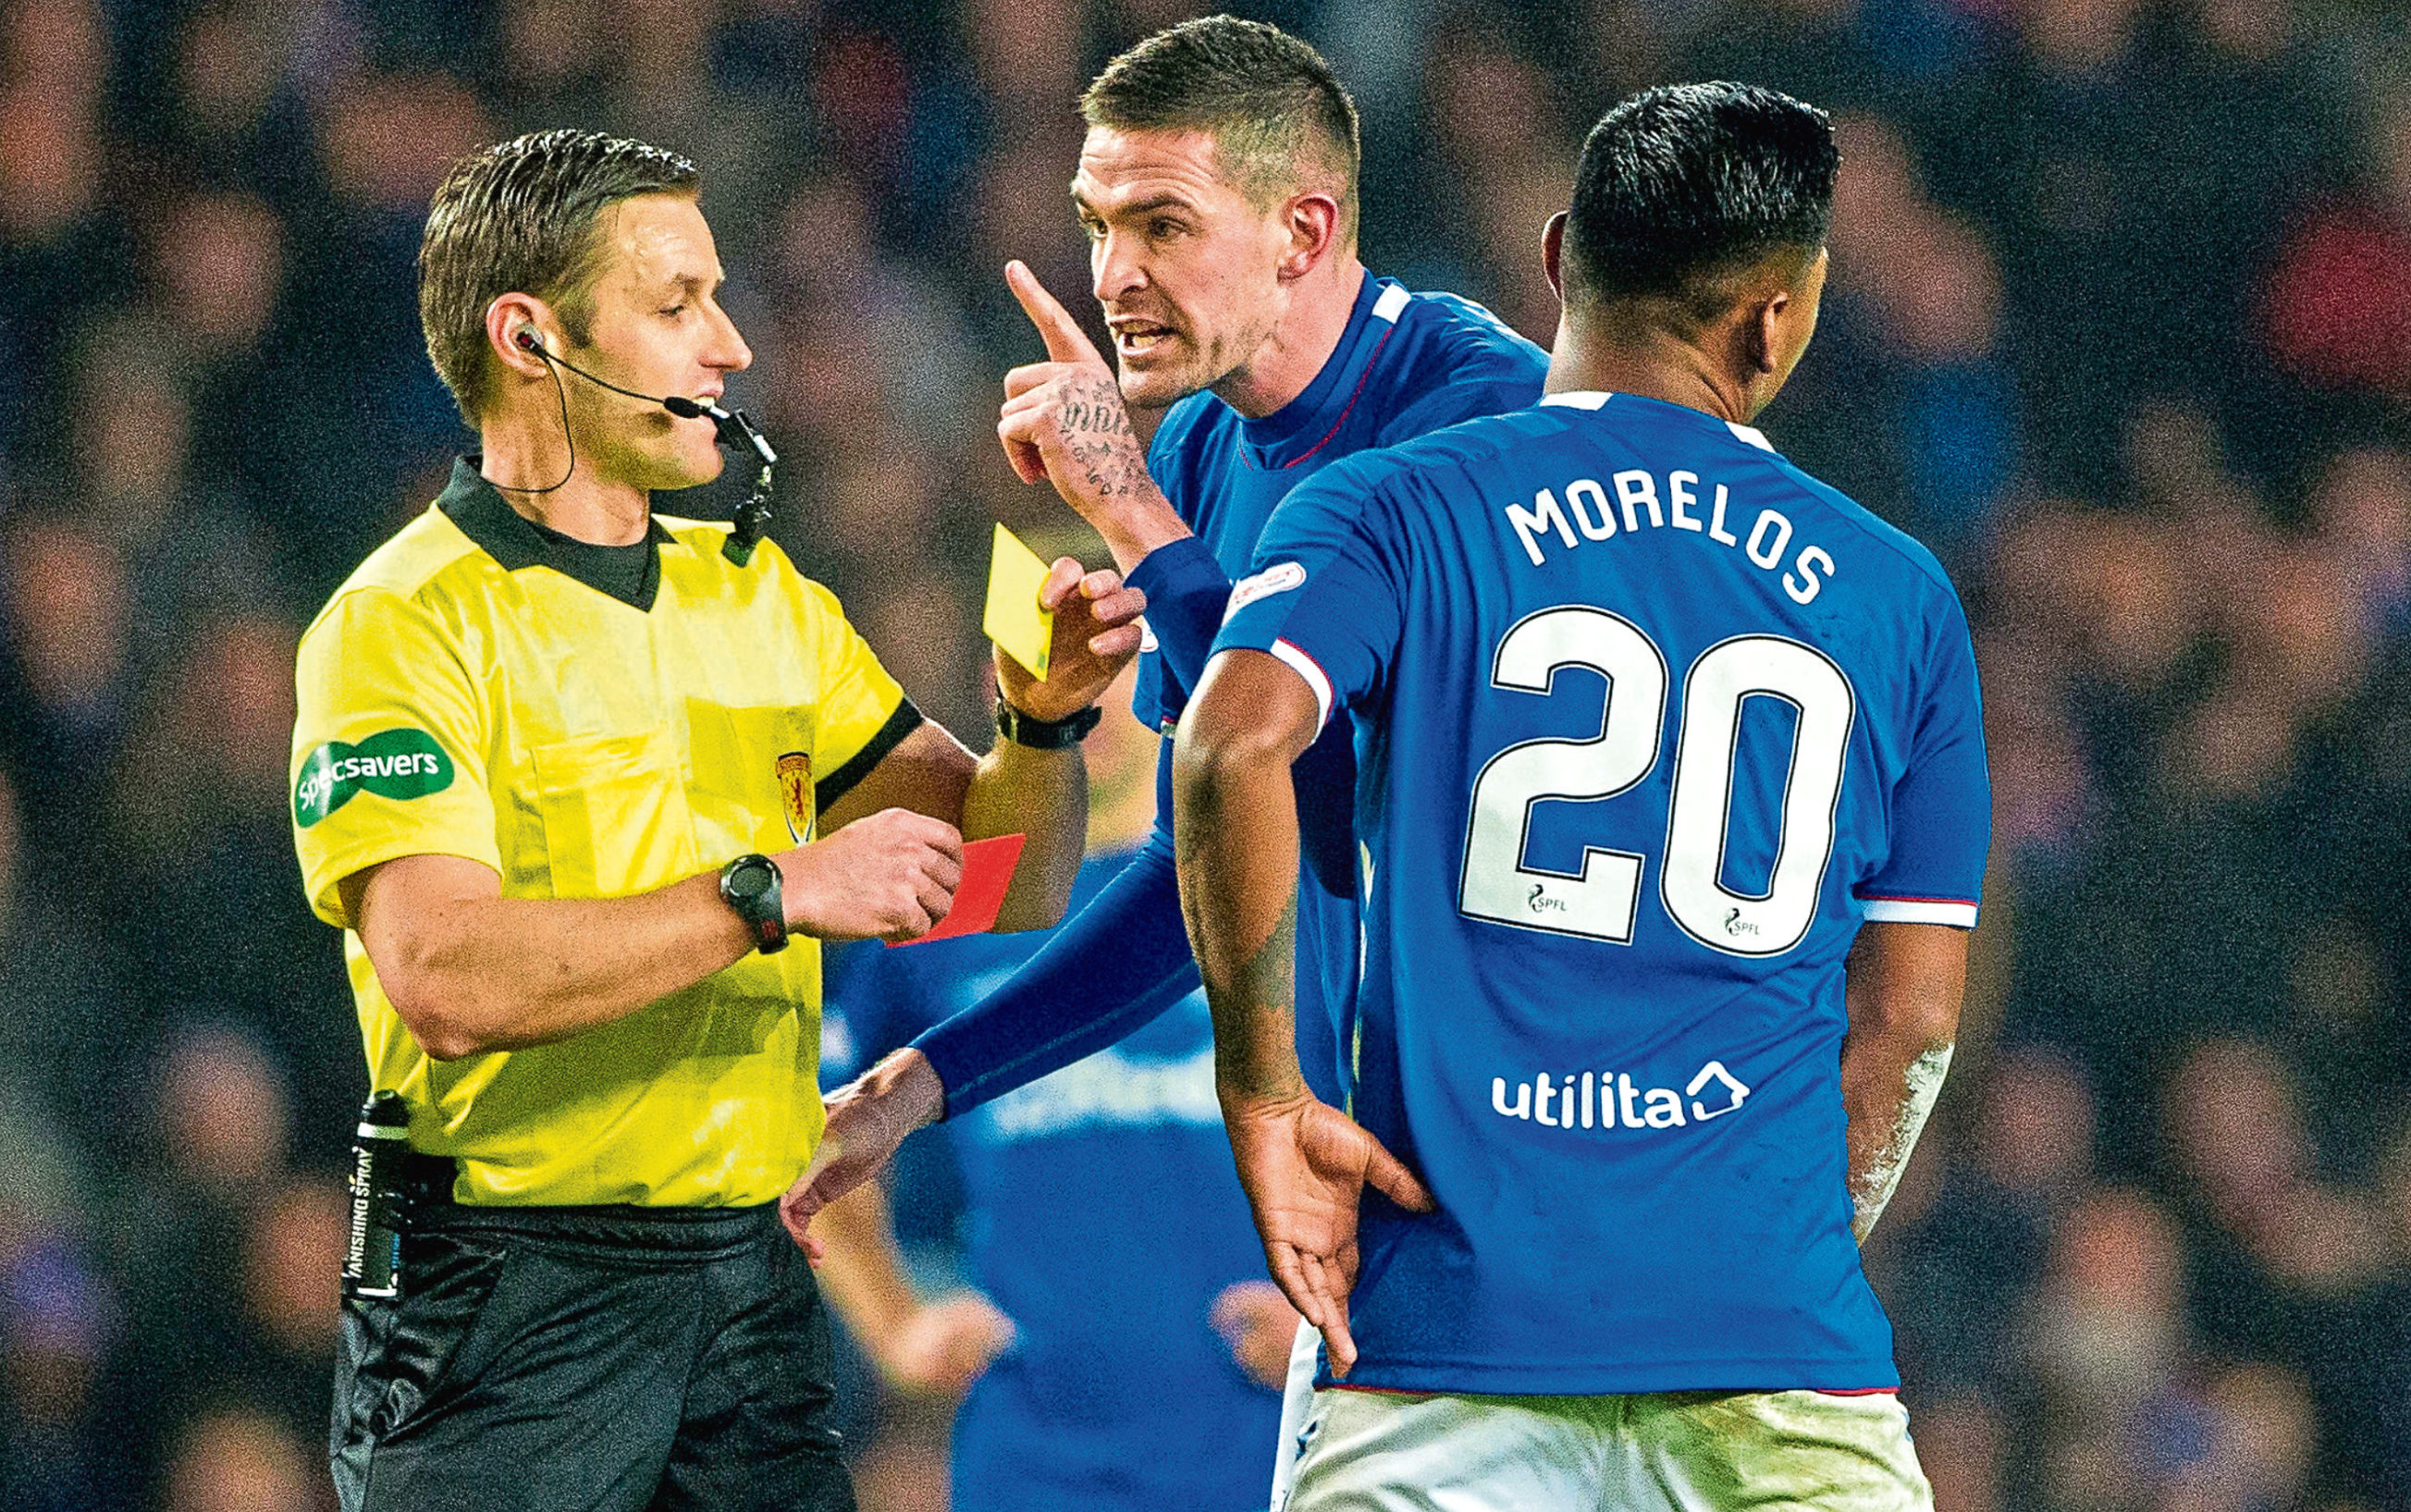 x
05/12/18 LADBROKES PREMIERSHIP
RANGERS v ABERDEEN (0-1)
IBROX - GLASGOW
Rangers' Alfredo Morelos leaves the pitch after receiving a red card from referee Steven McLean as Kyle Lafferty protests